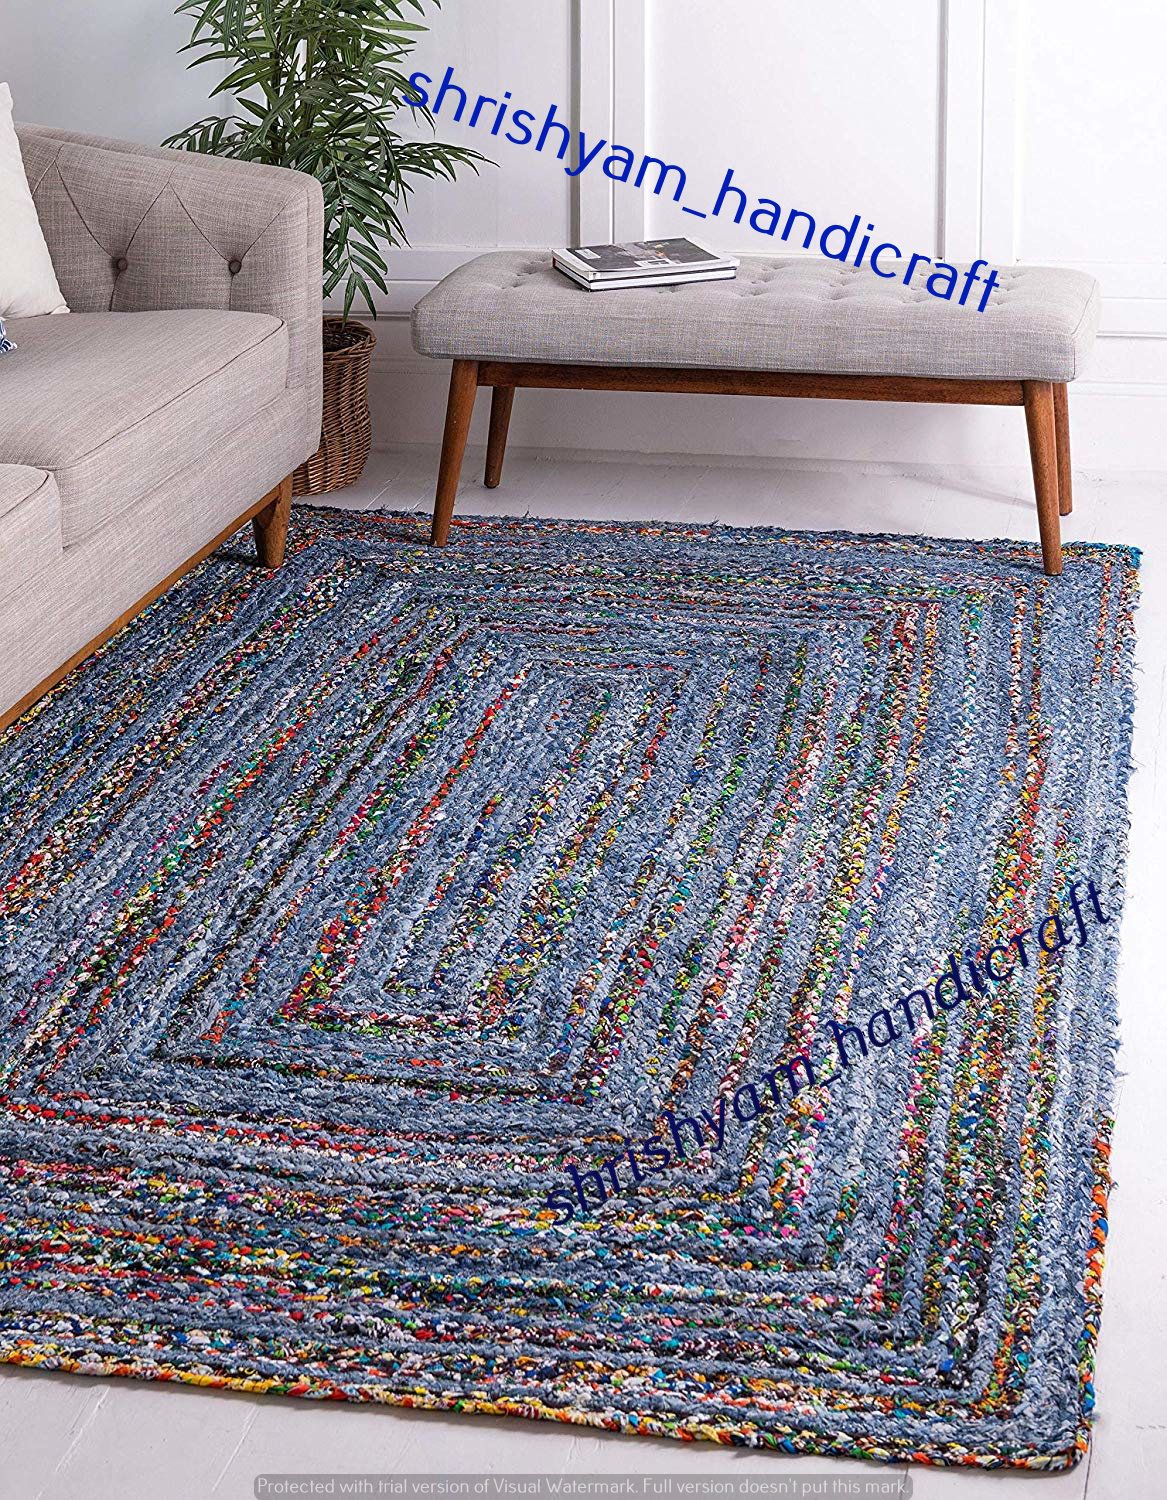 Hand Braided Bohemian Colorful Denim Chindi Area Rug Multi – Etsy With Regard To Hand Braided Rugs (View 14 of 15)